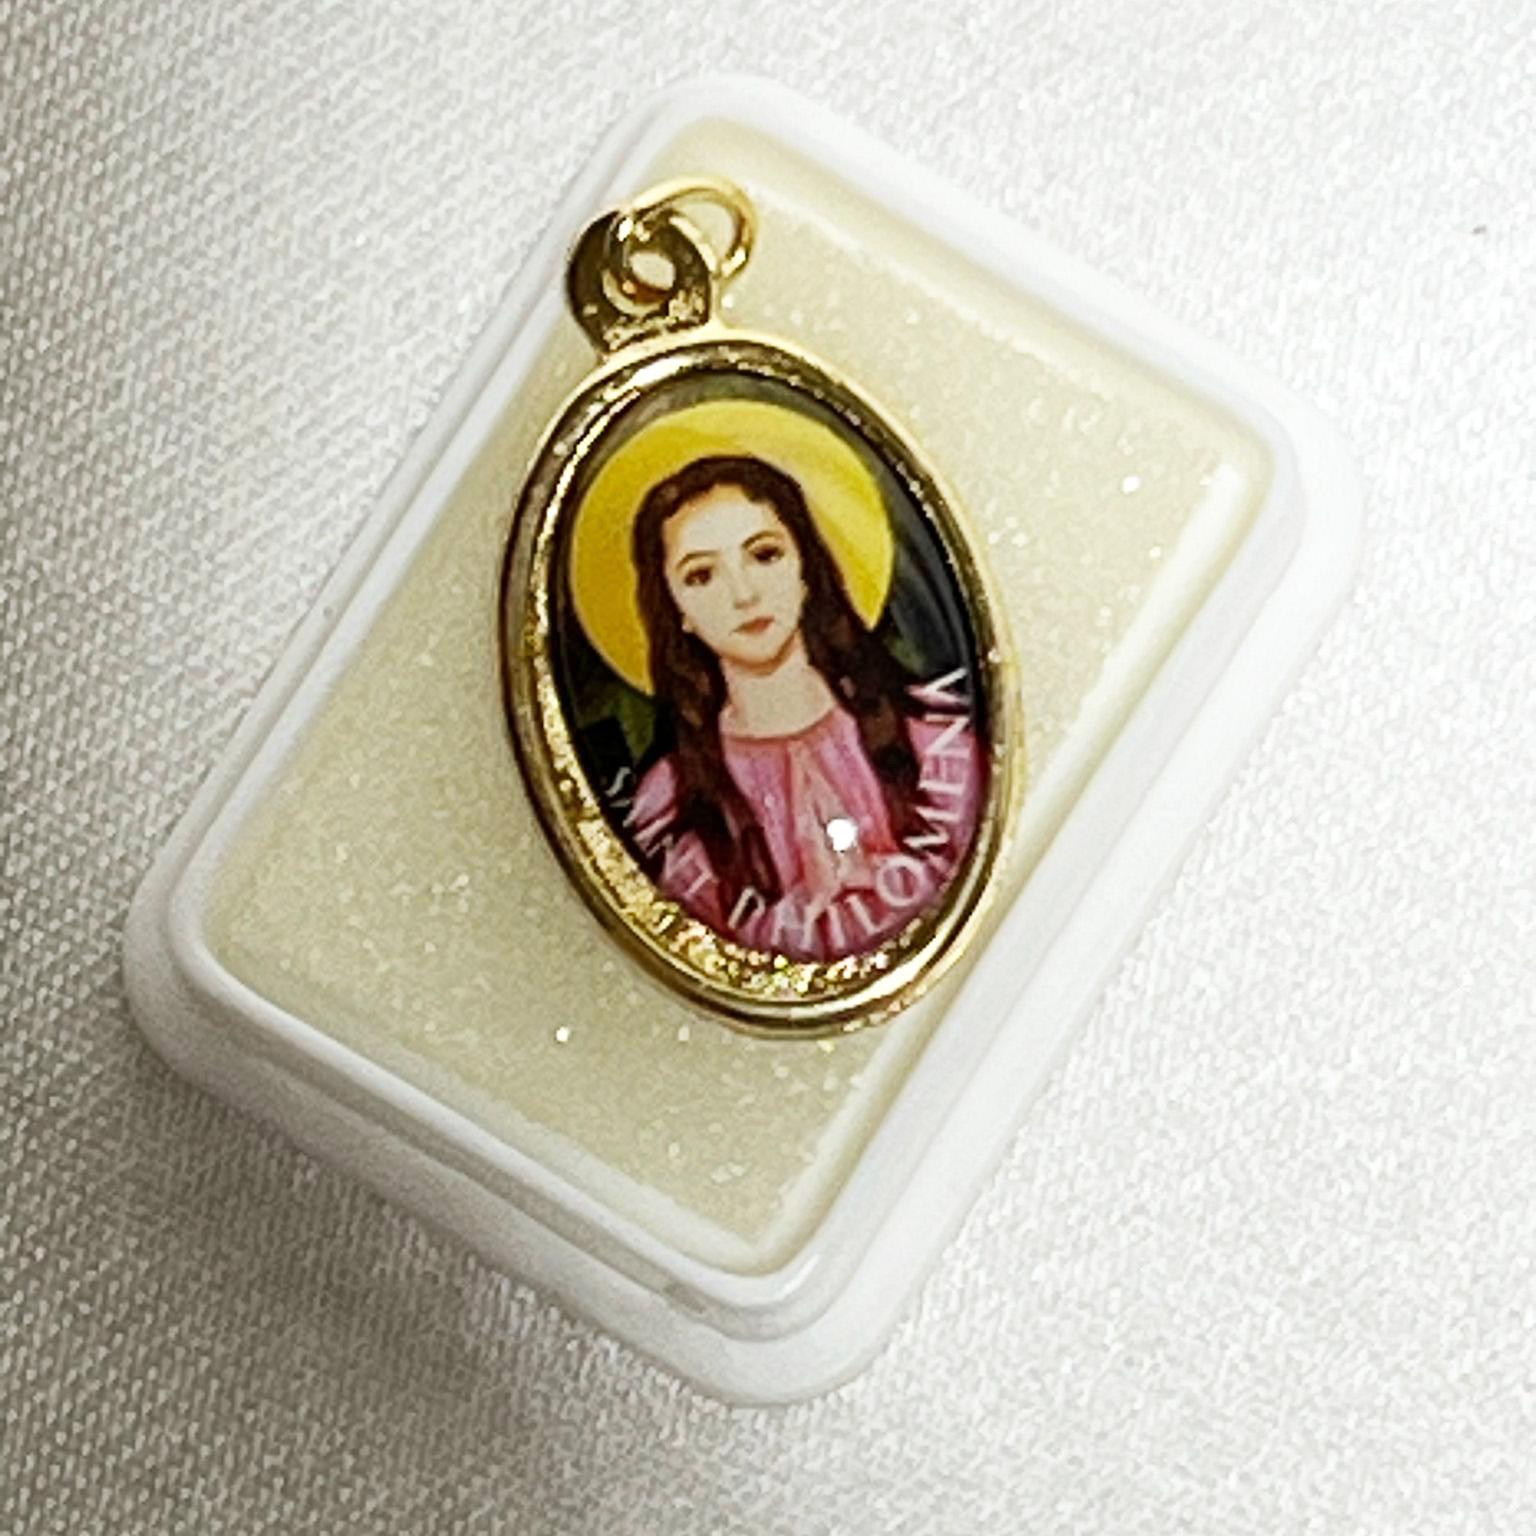 St Philomena oval-shaped gold metal medal